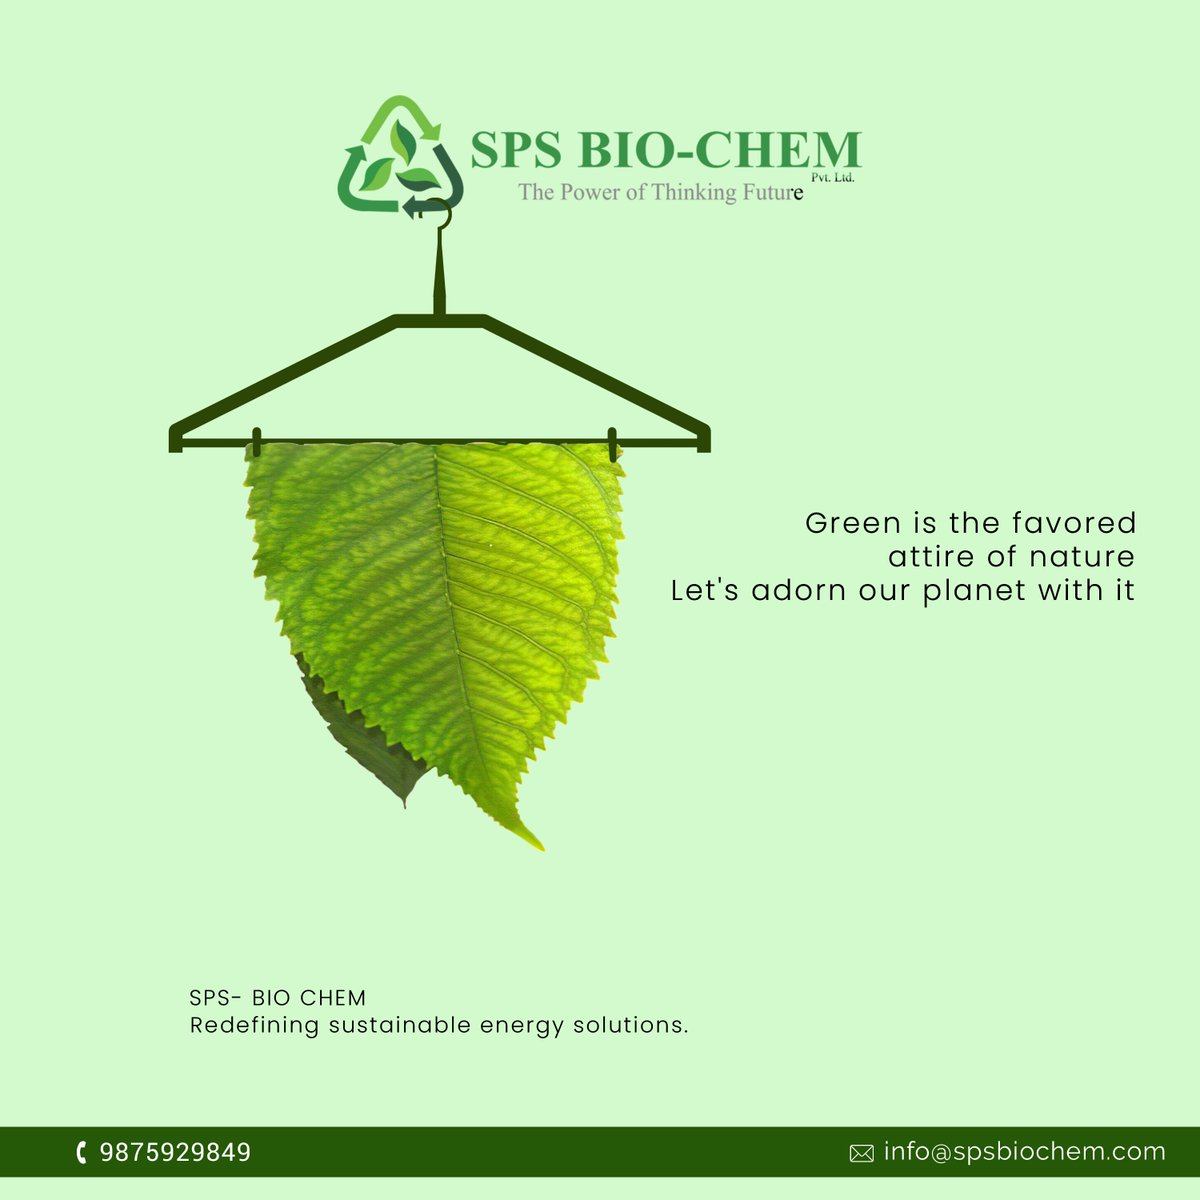 From our biochemical manufacturing processes to our dedication to Renewable Energy solutions, we're focused on reducing Carbon Emissions and promoting a Pollution-Free and Sustainable World for the coming generations. #renewableenergy #spsbiochem #rohitsingla #energyefficiency